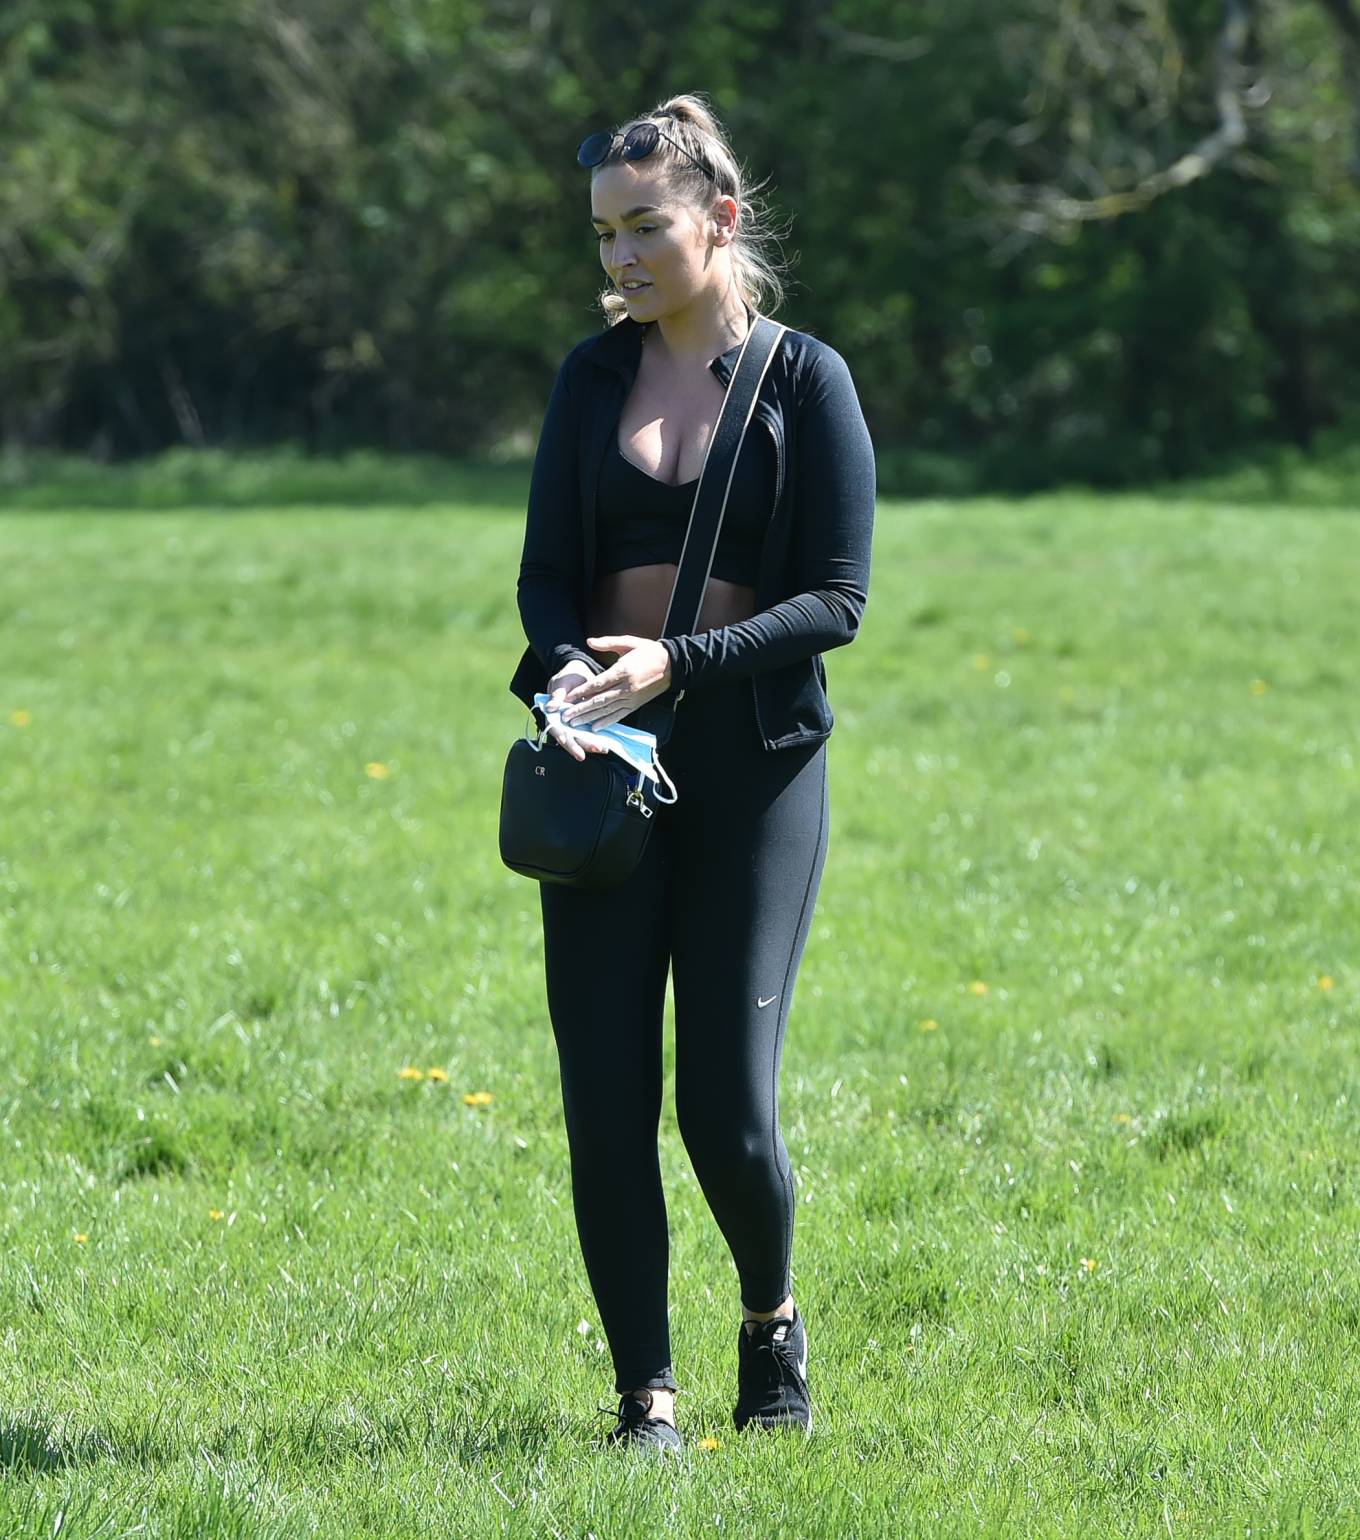 Chloe Ross with sister Madison â€“ Out for a dog walk in Essex